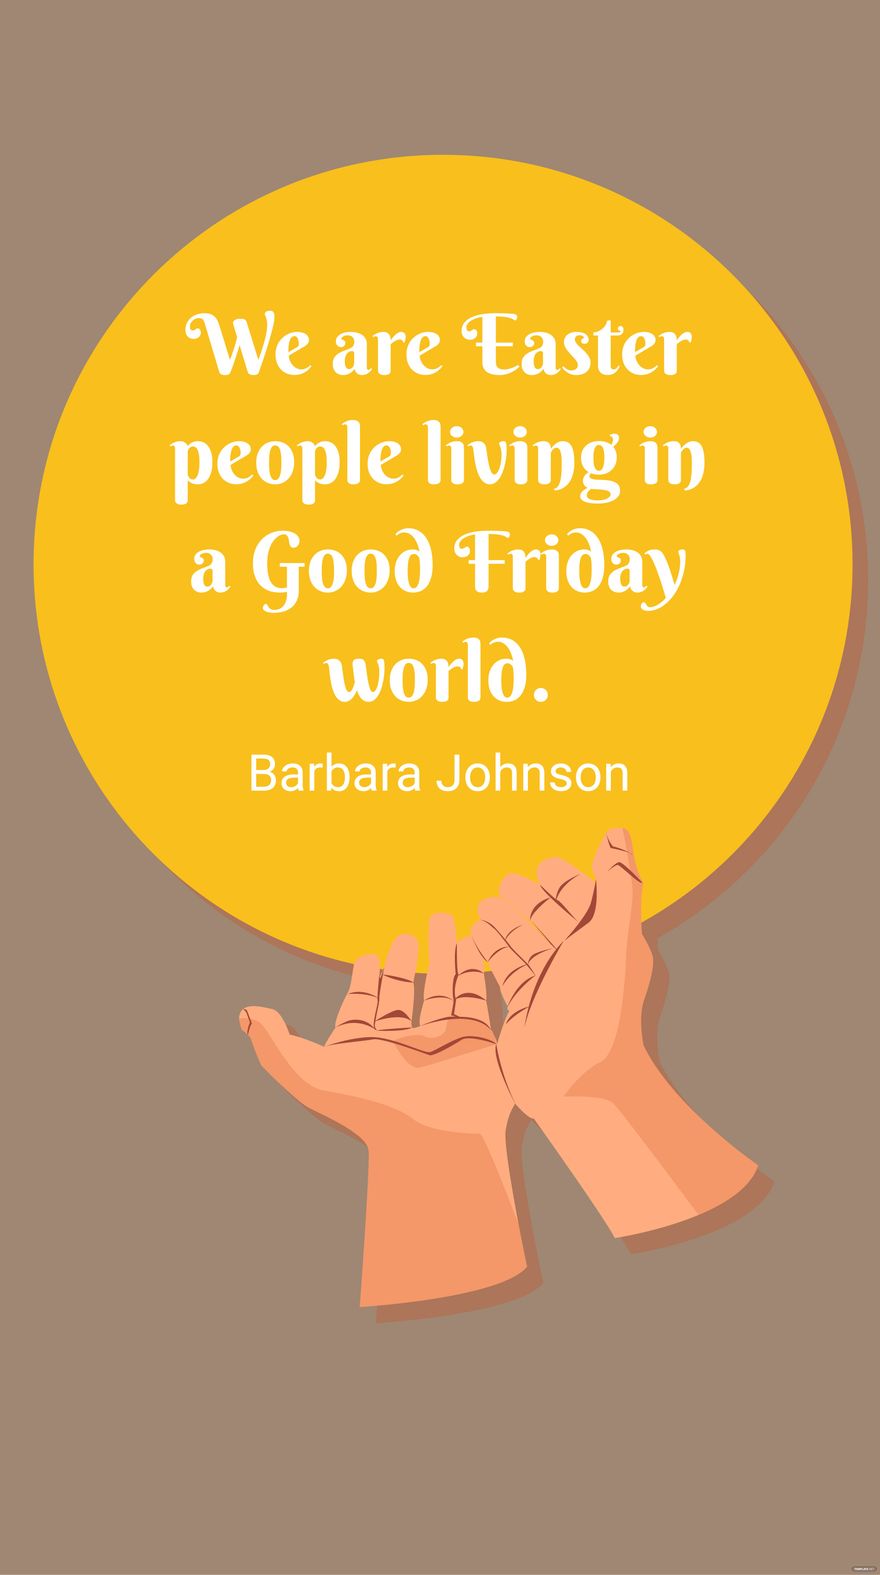 Barbara Johnson - We are Easter people living in a Good Friday world.